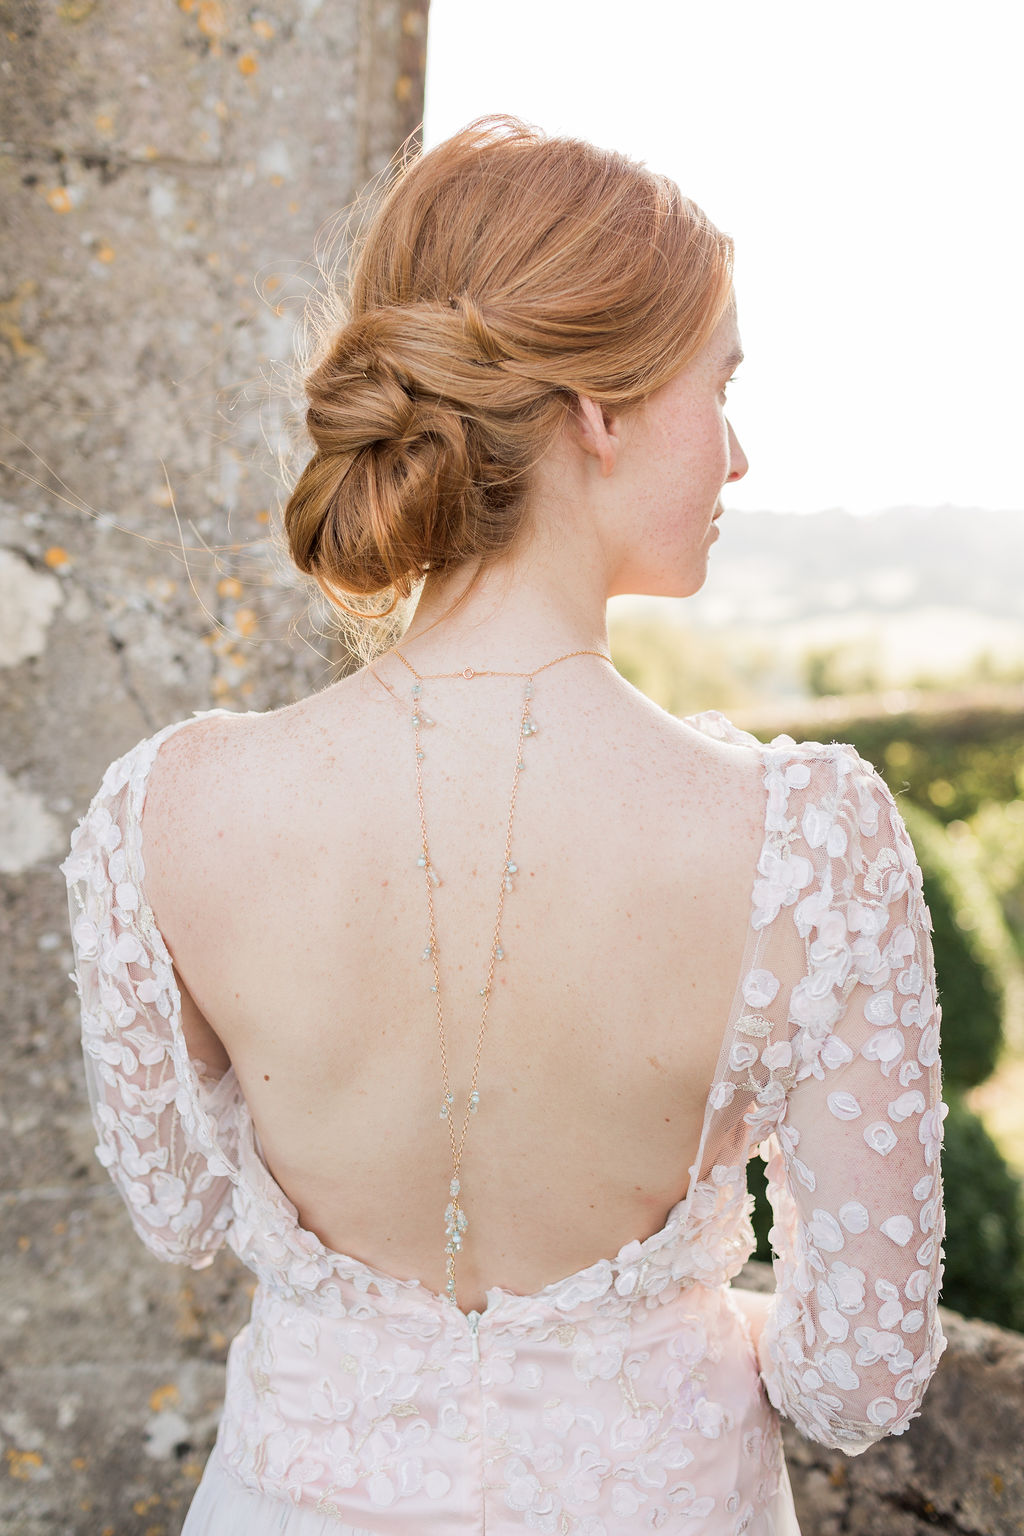 Clare Lloyd Accessories are UK bridal hair designs beautifully handmade for a luxury bridal look